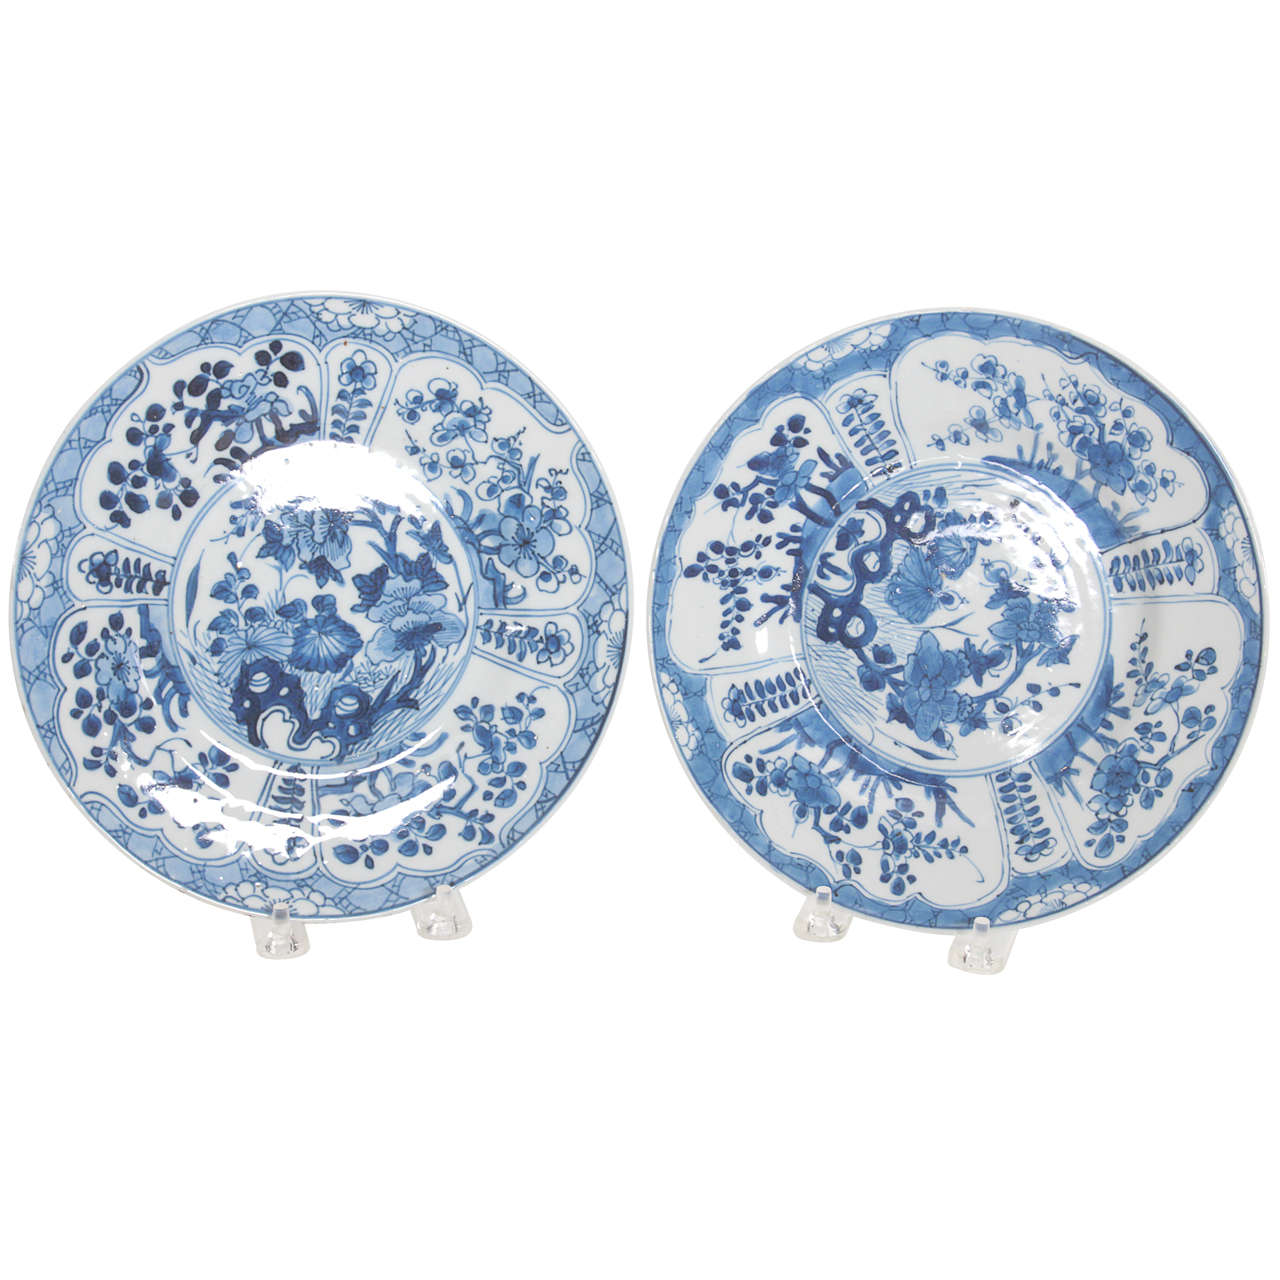 Pair of Chinese export blue and white plates 18th Century